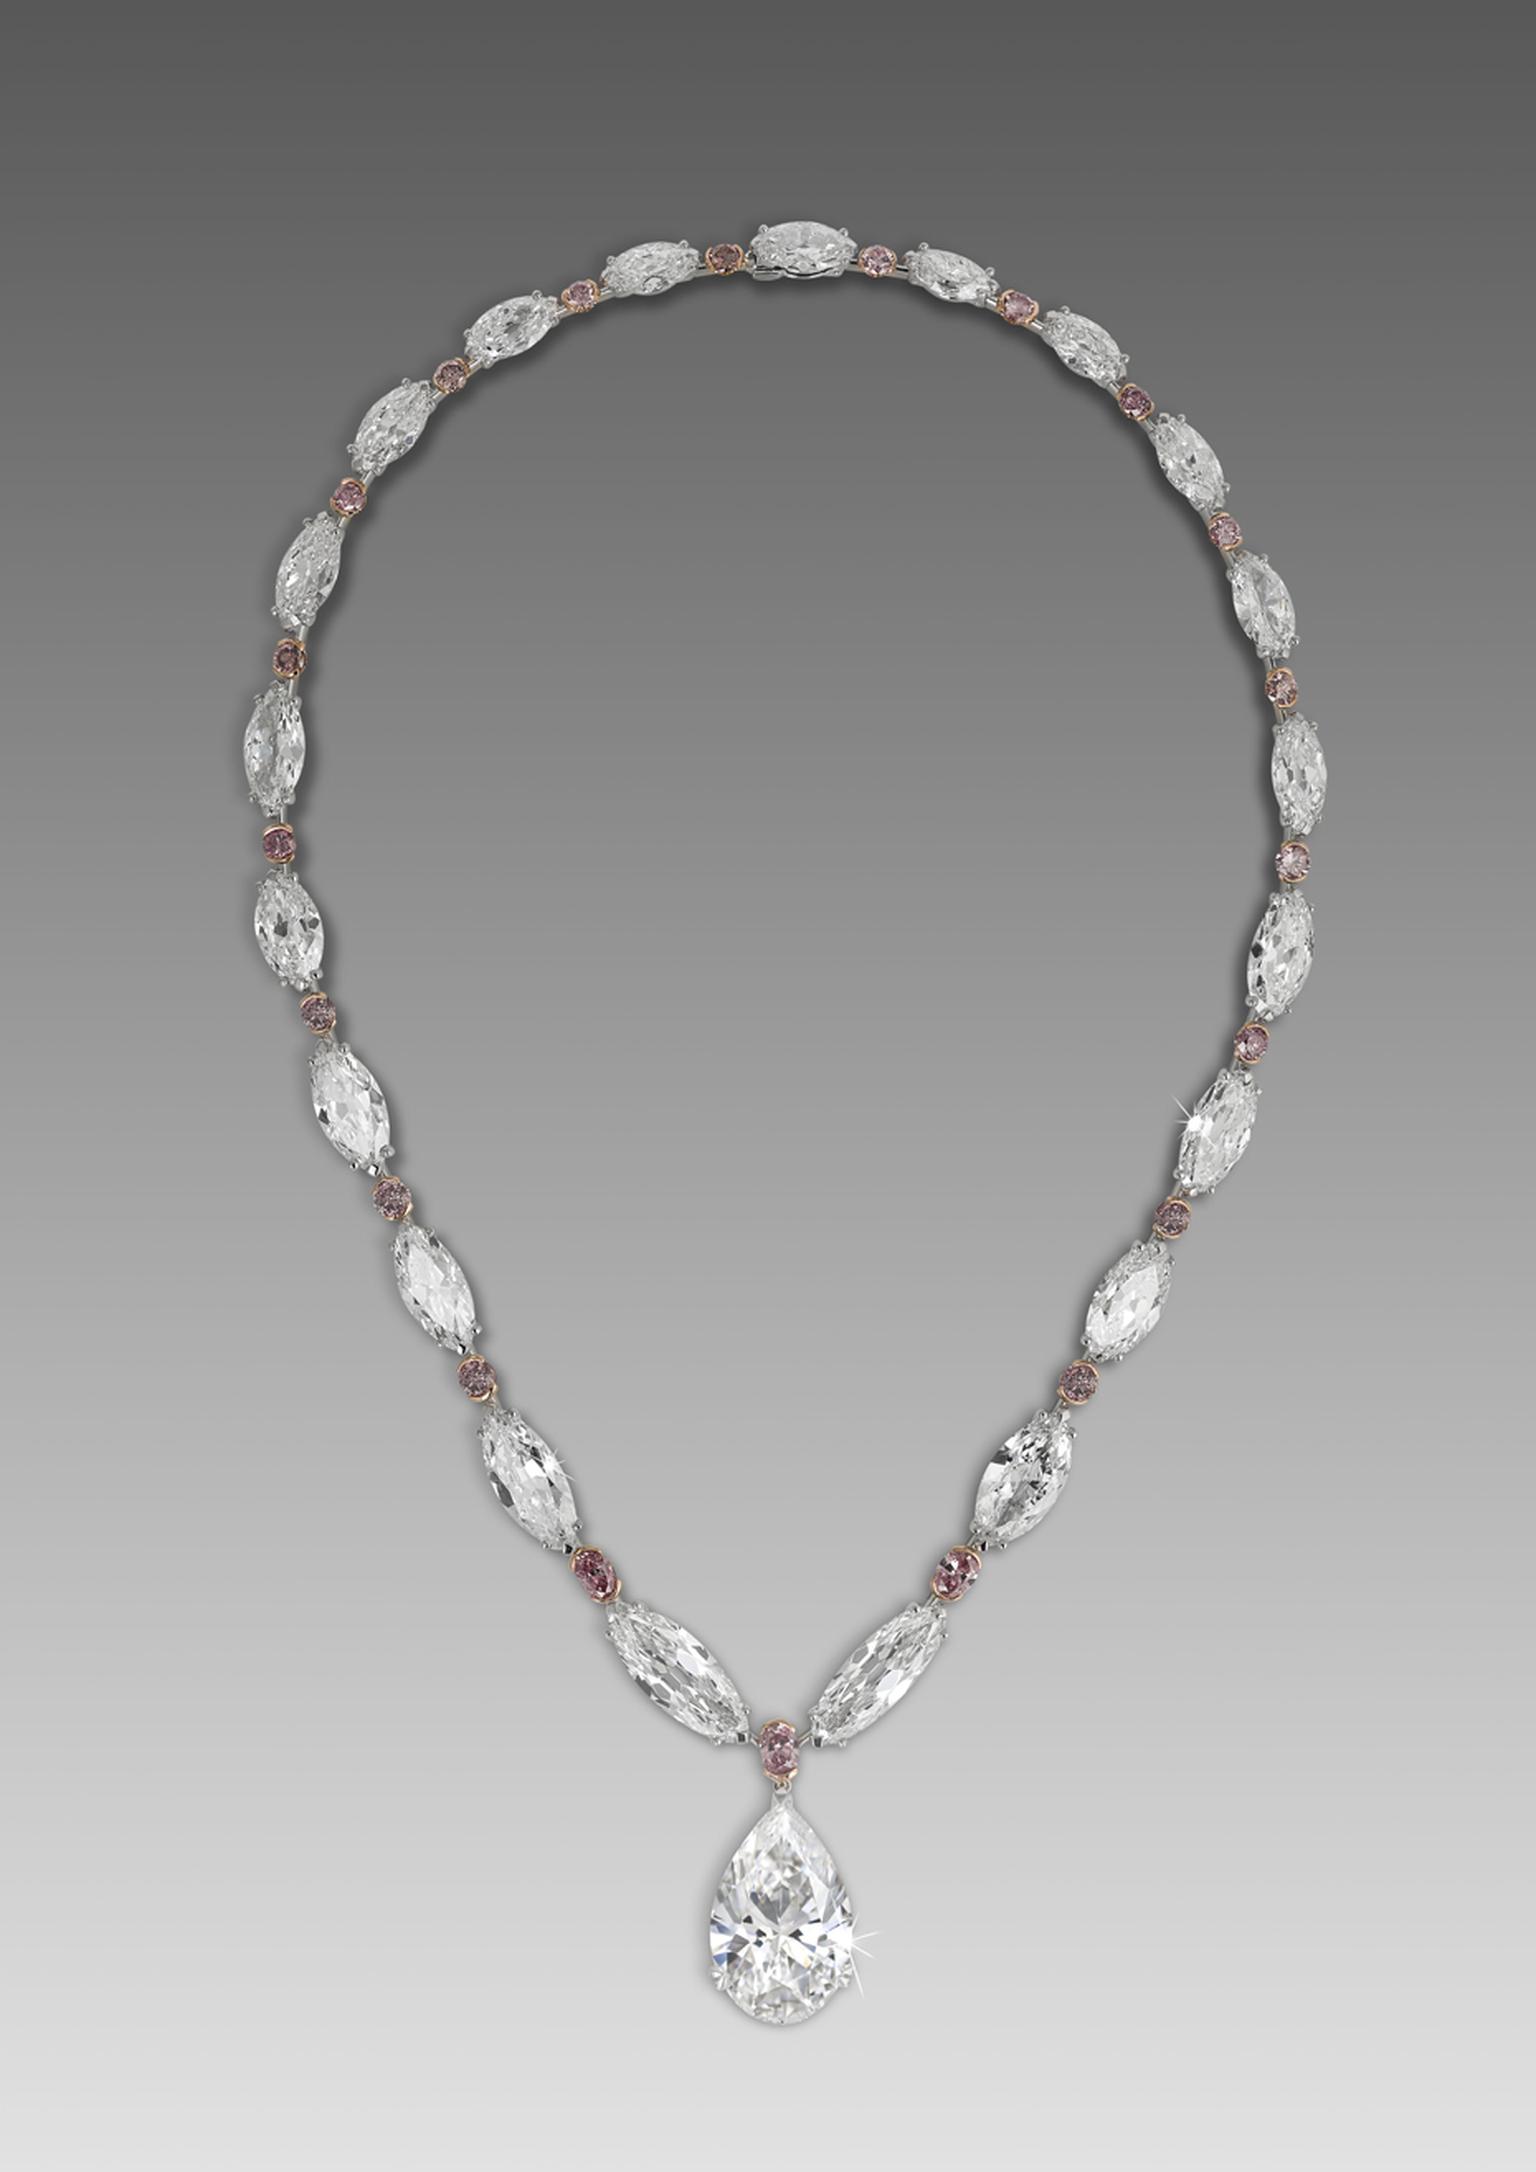 David Morris 22.22ct D IF pear-shaped diamond drop on an antique marquise-cut white diamond and brilliant-cut pink diamond necklace.